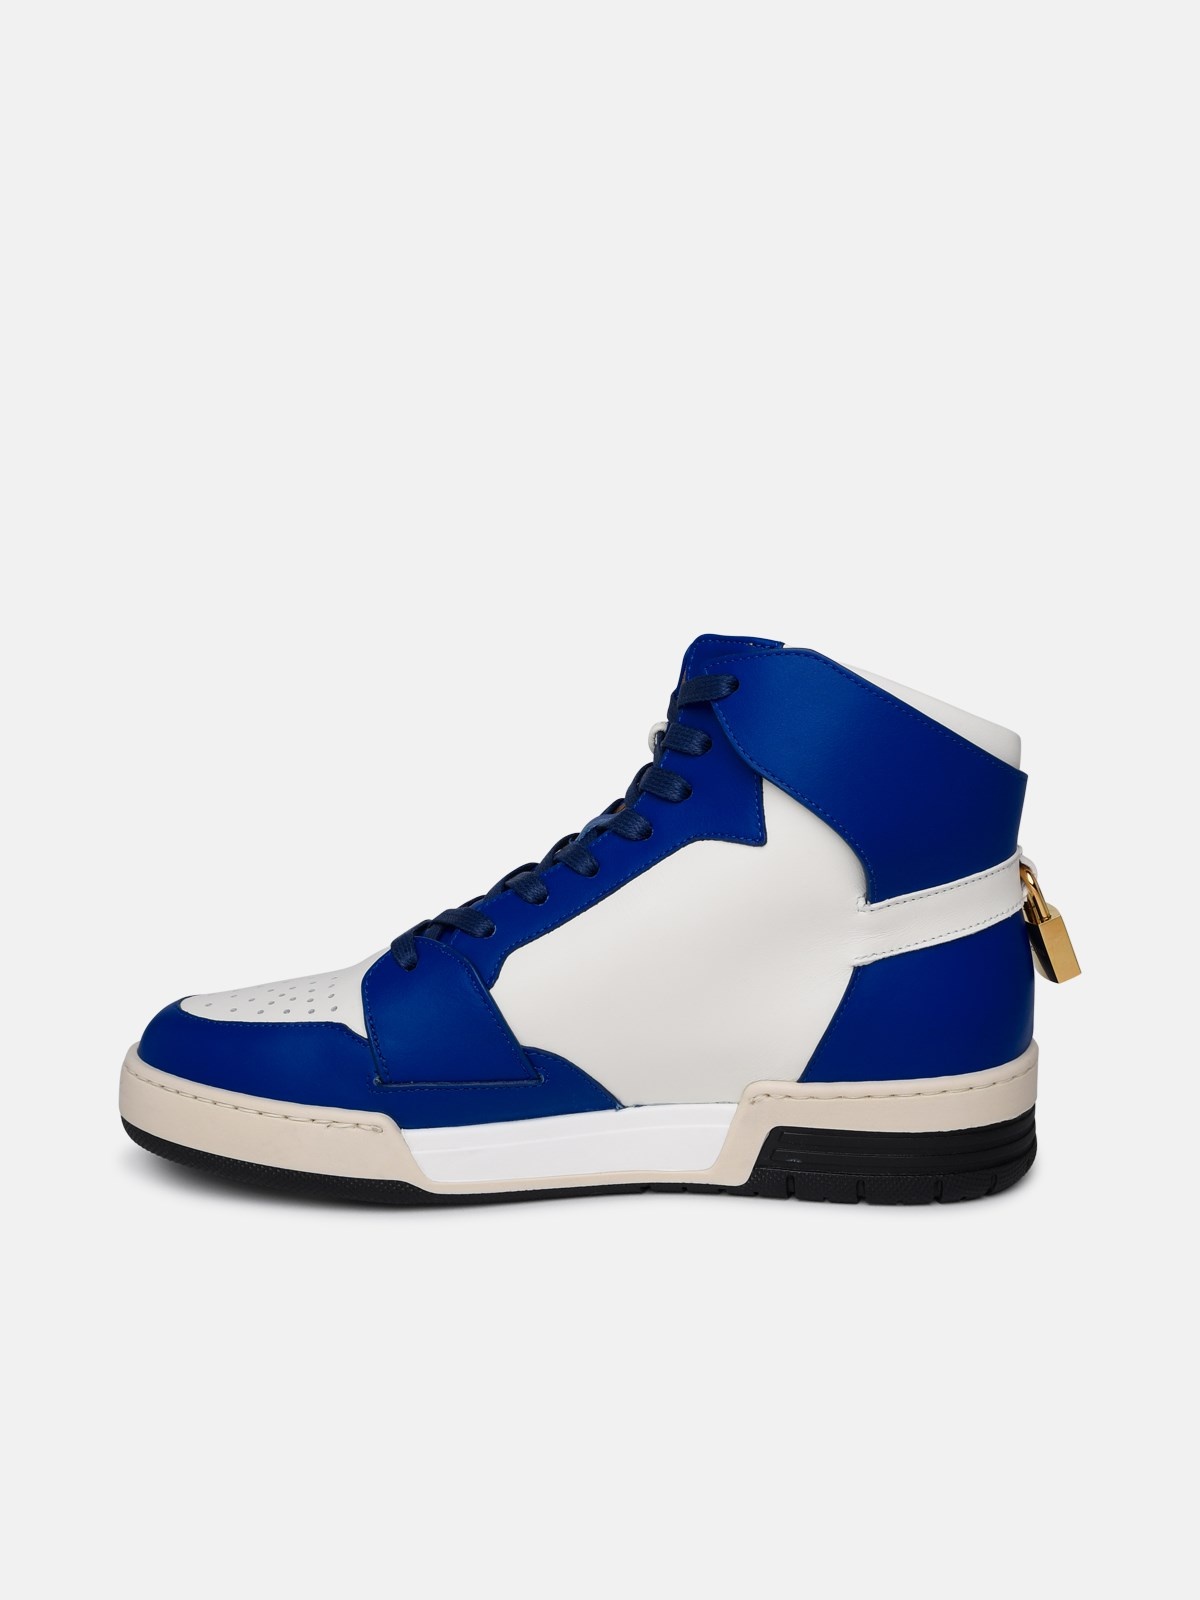 'AIR JON' WHITE AND BLUE LEATHER SNEAKERS - 3